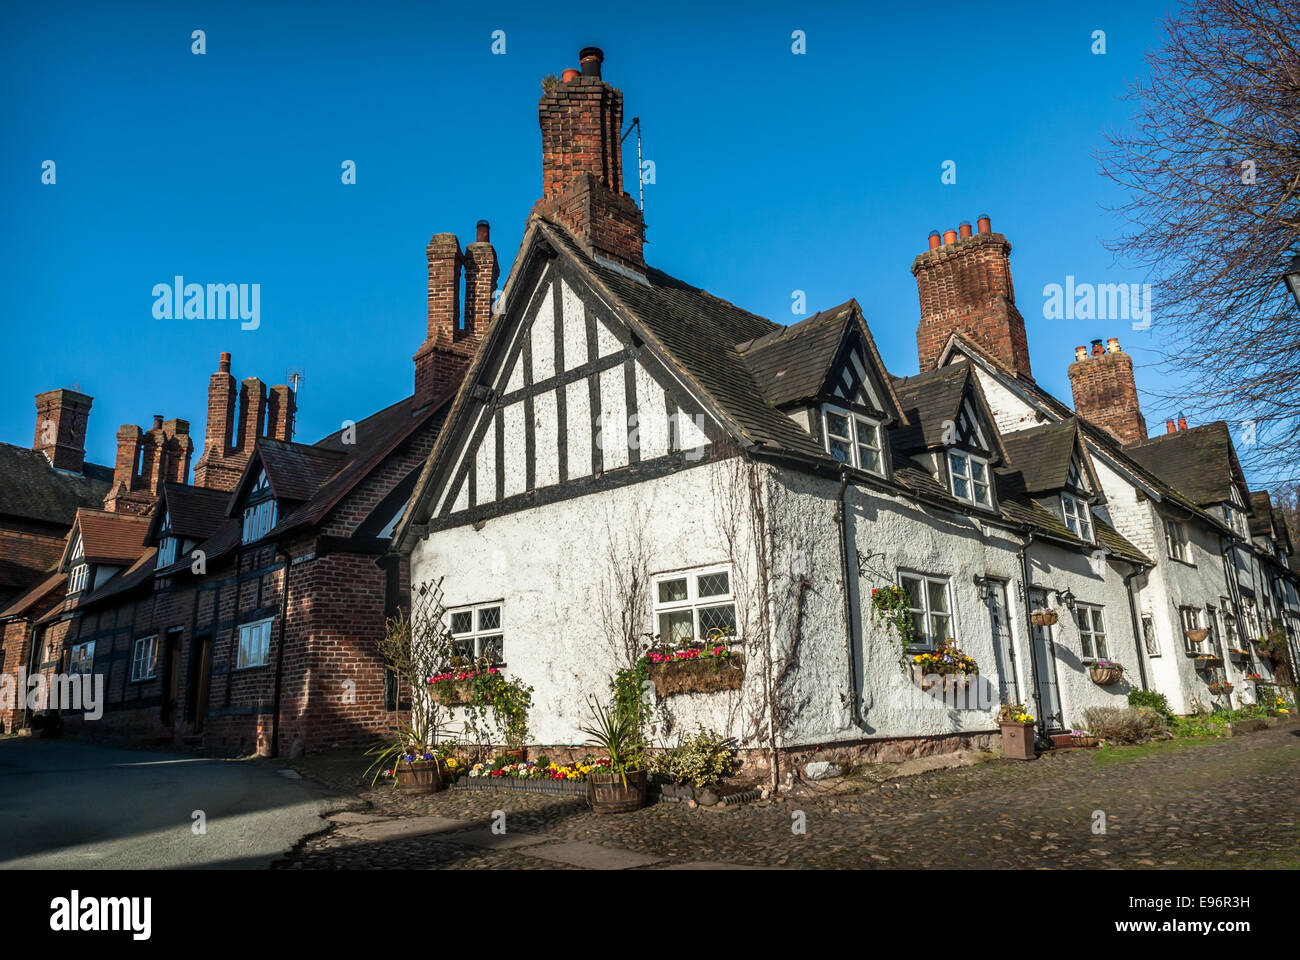 Timber framed cottages in the village of Great Budworth, Cheshire, England. Stock Photo